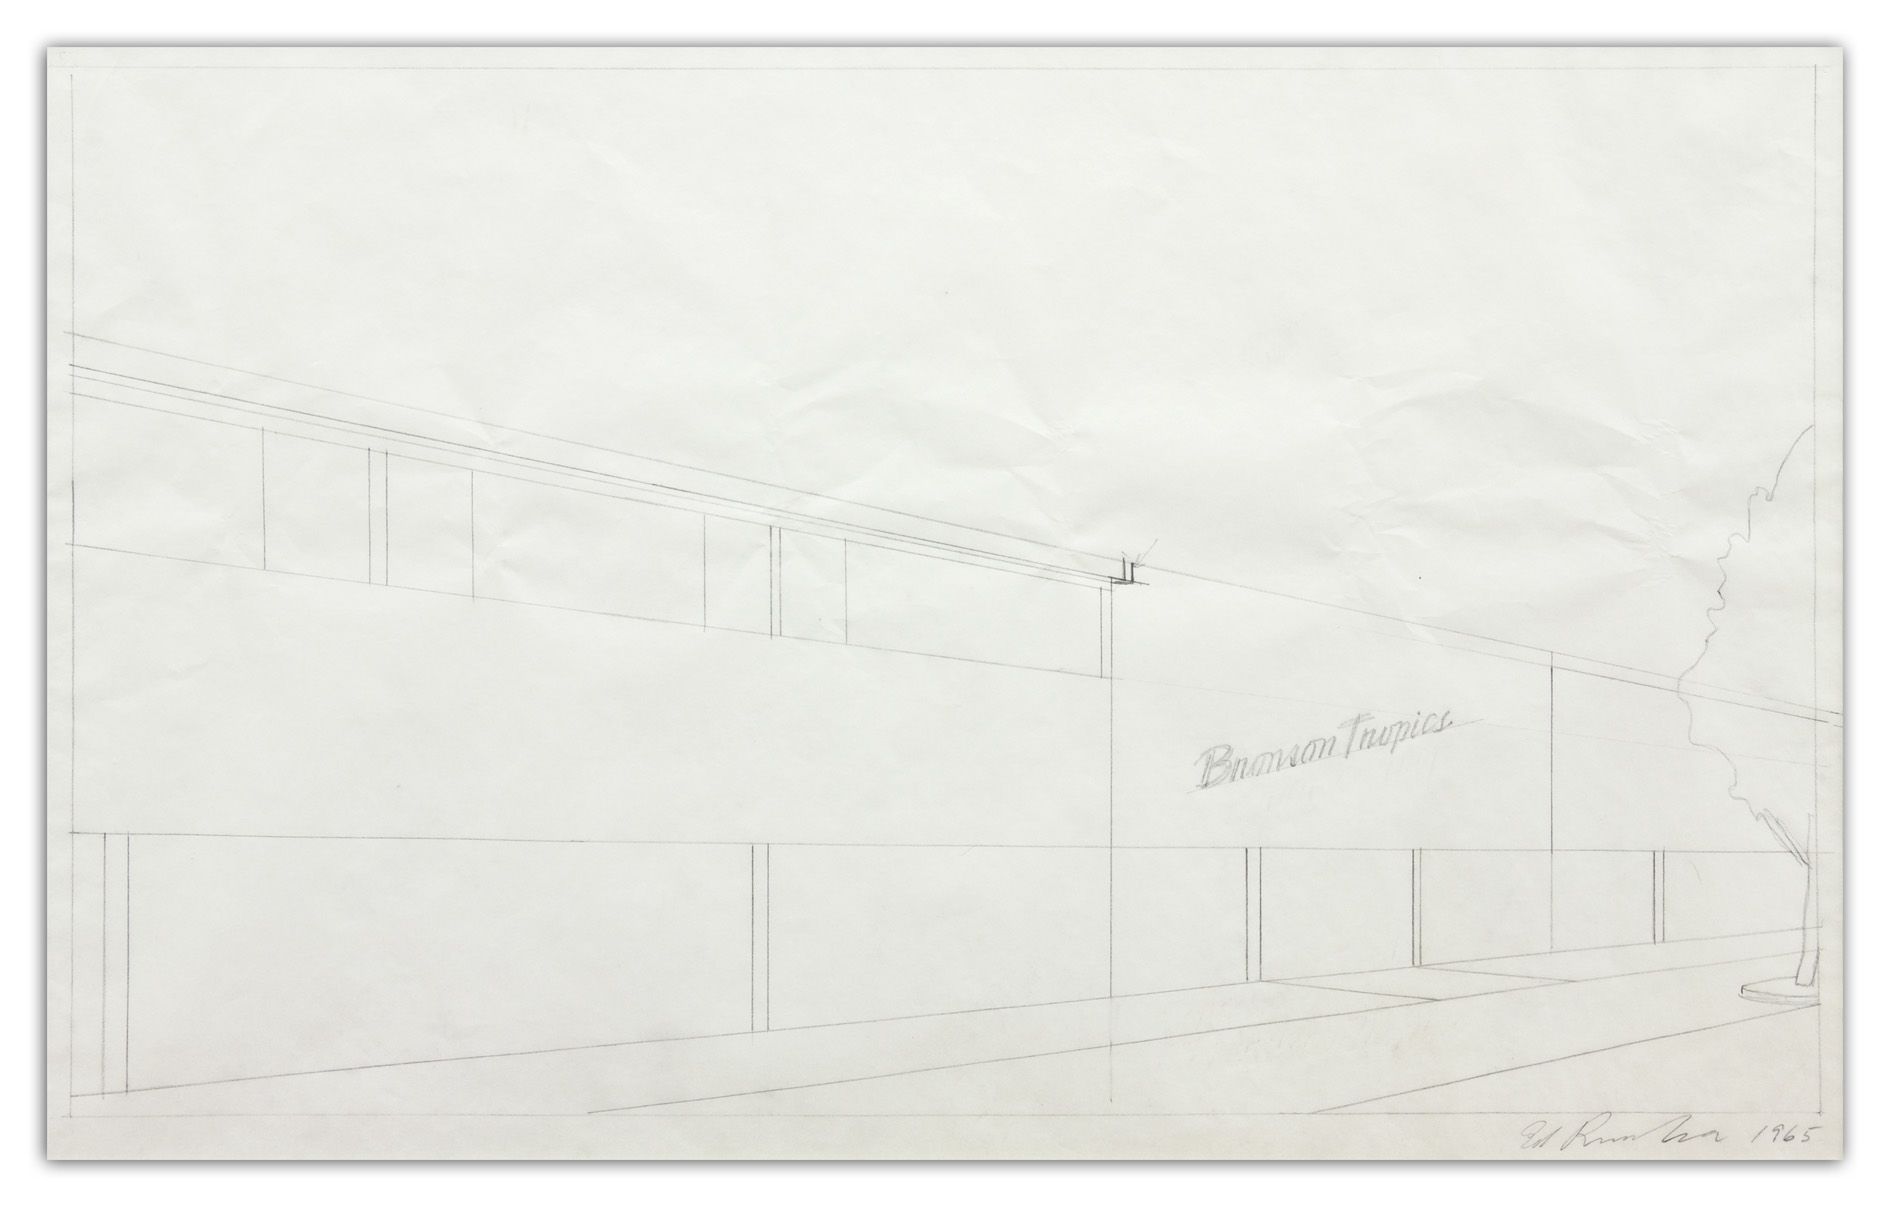 Ed Ruscha – Apartments, Parking Lots, Palm Trees and others: Films, Photographs and Drawings from 1961 to 1975 – Berlin